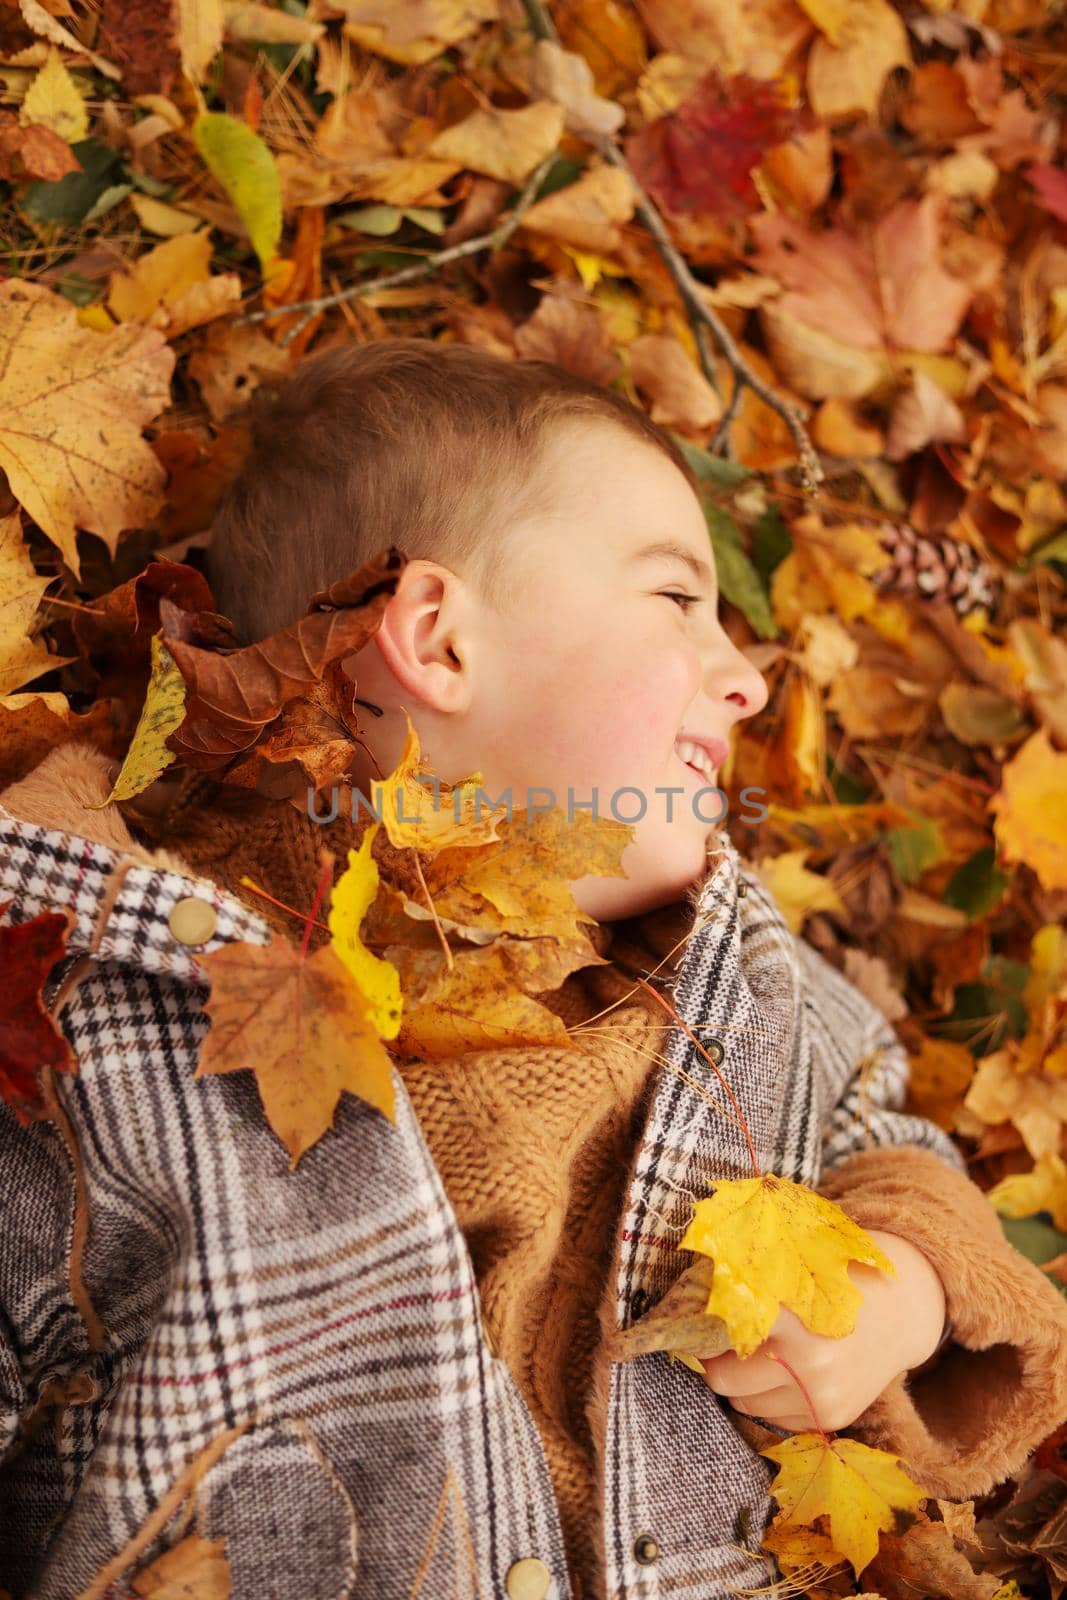 Outdoor fun in autumn. Child playing with autumn fallen leaves in park. Happy little boy lying down on yellow leaves outdoors. View from above. by creativebird